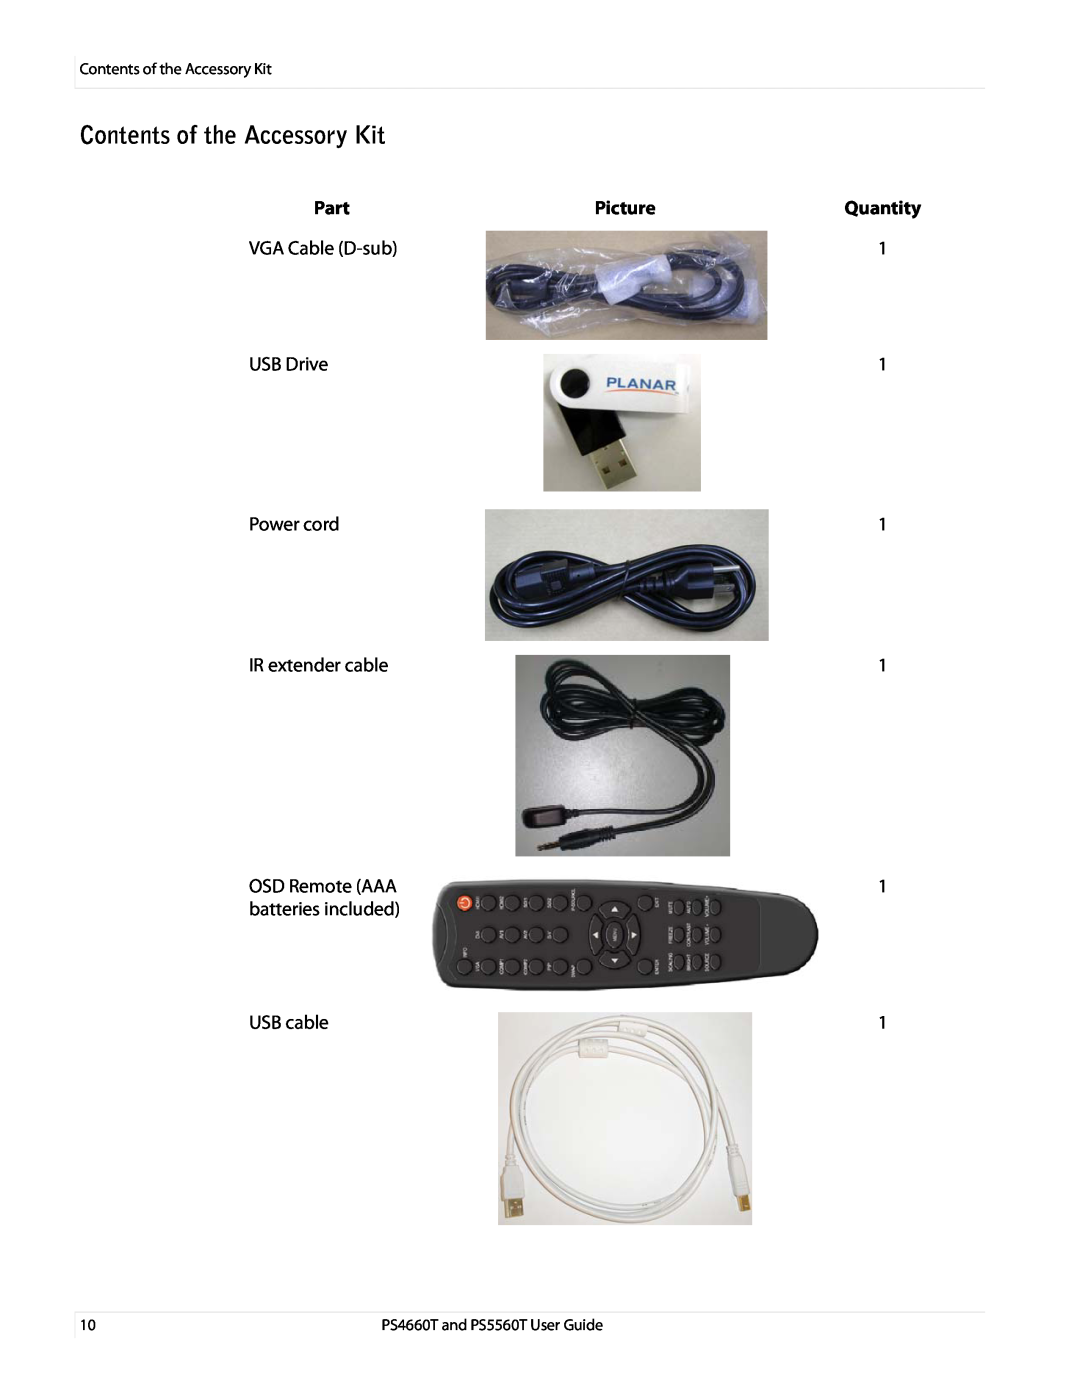 Planar PS466OT user manual Contents of the Accessory Kit, Part, Picture, Quantity, PS4660T and PS5560T User Guide 